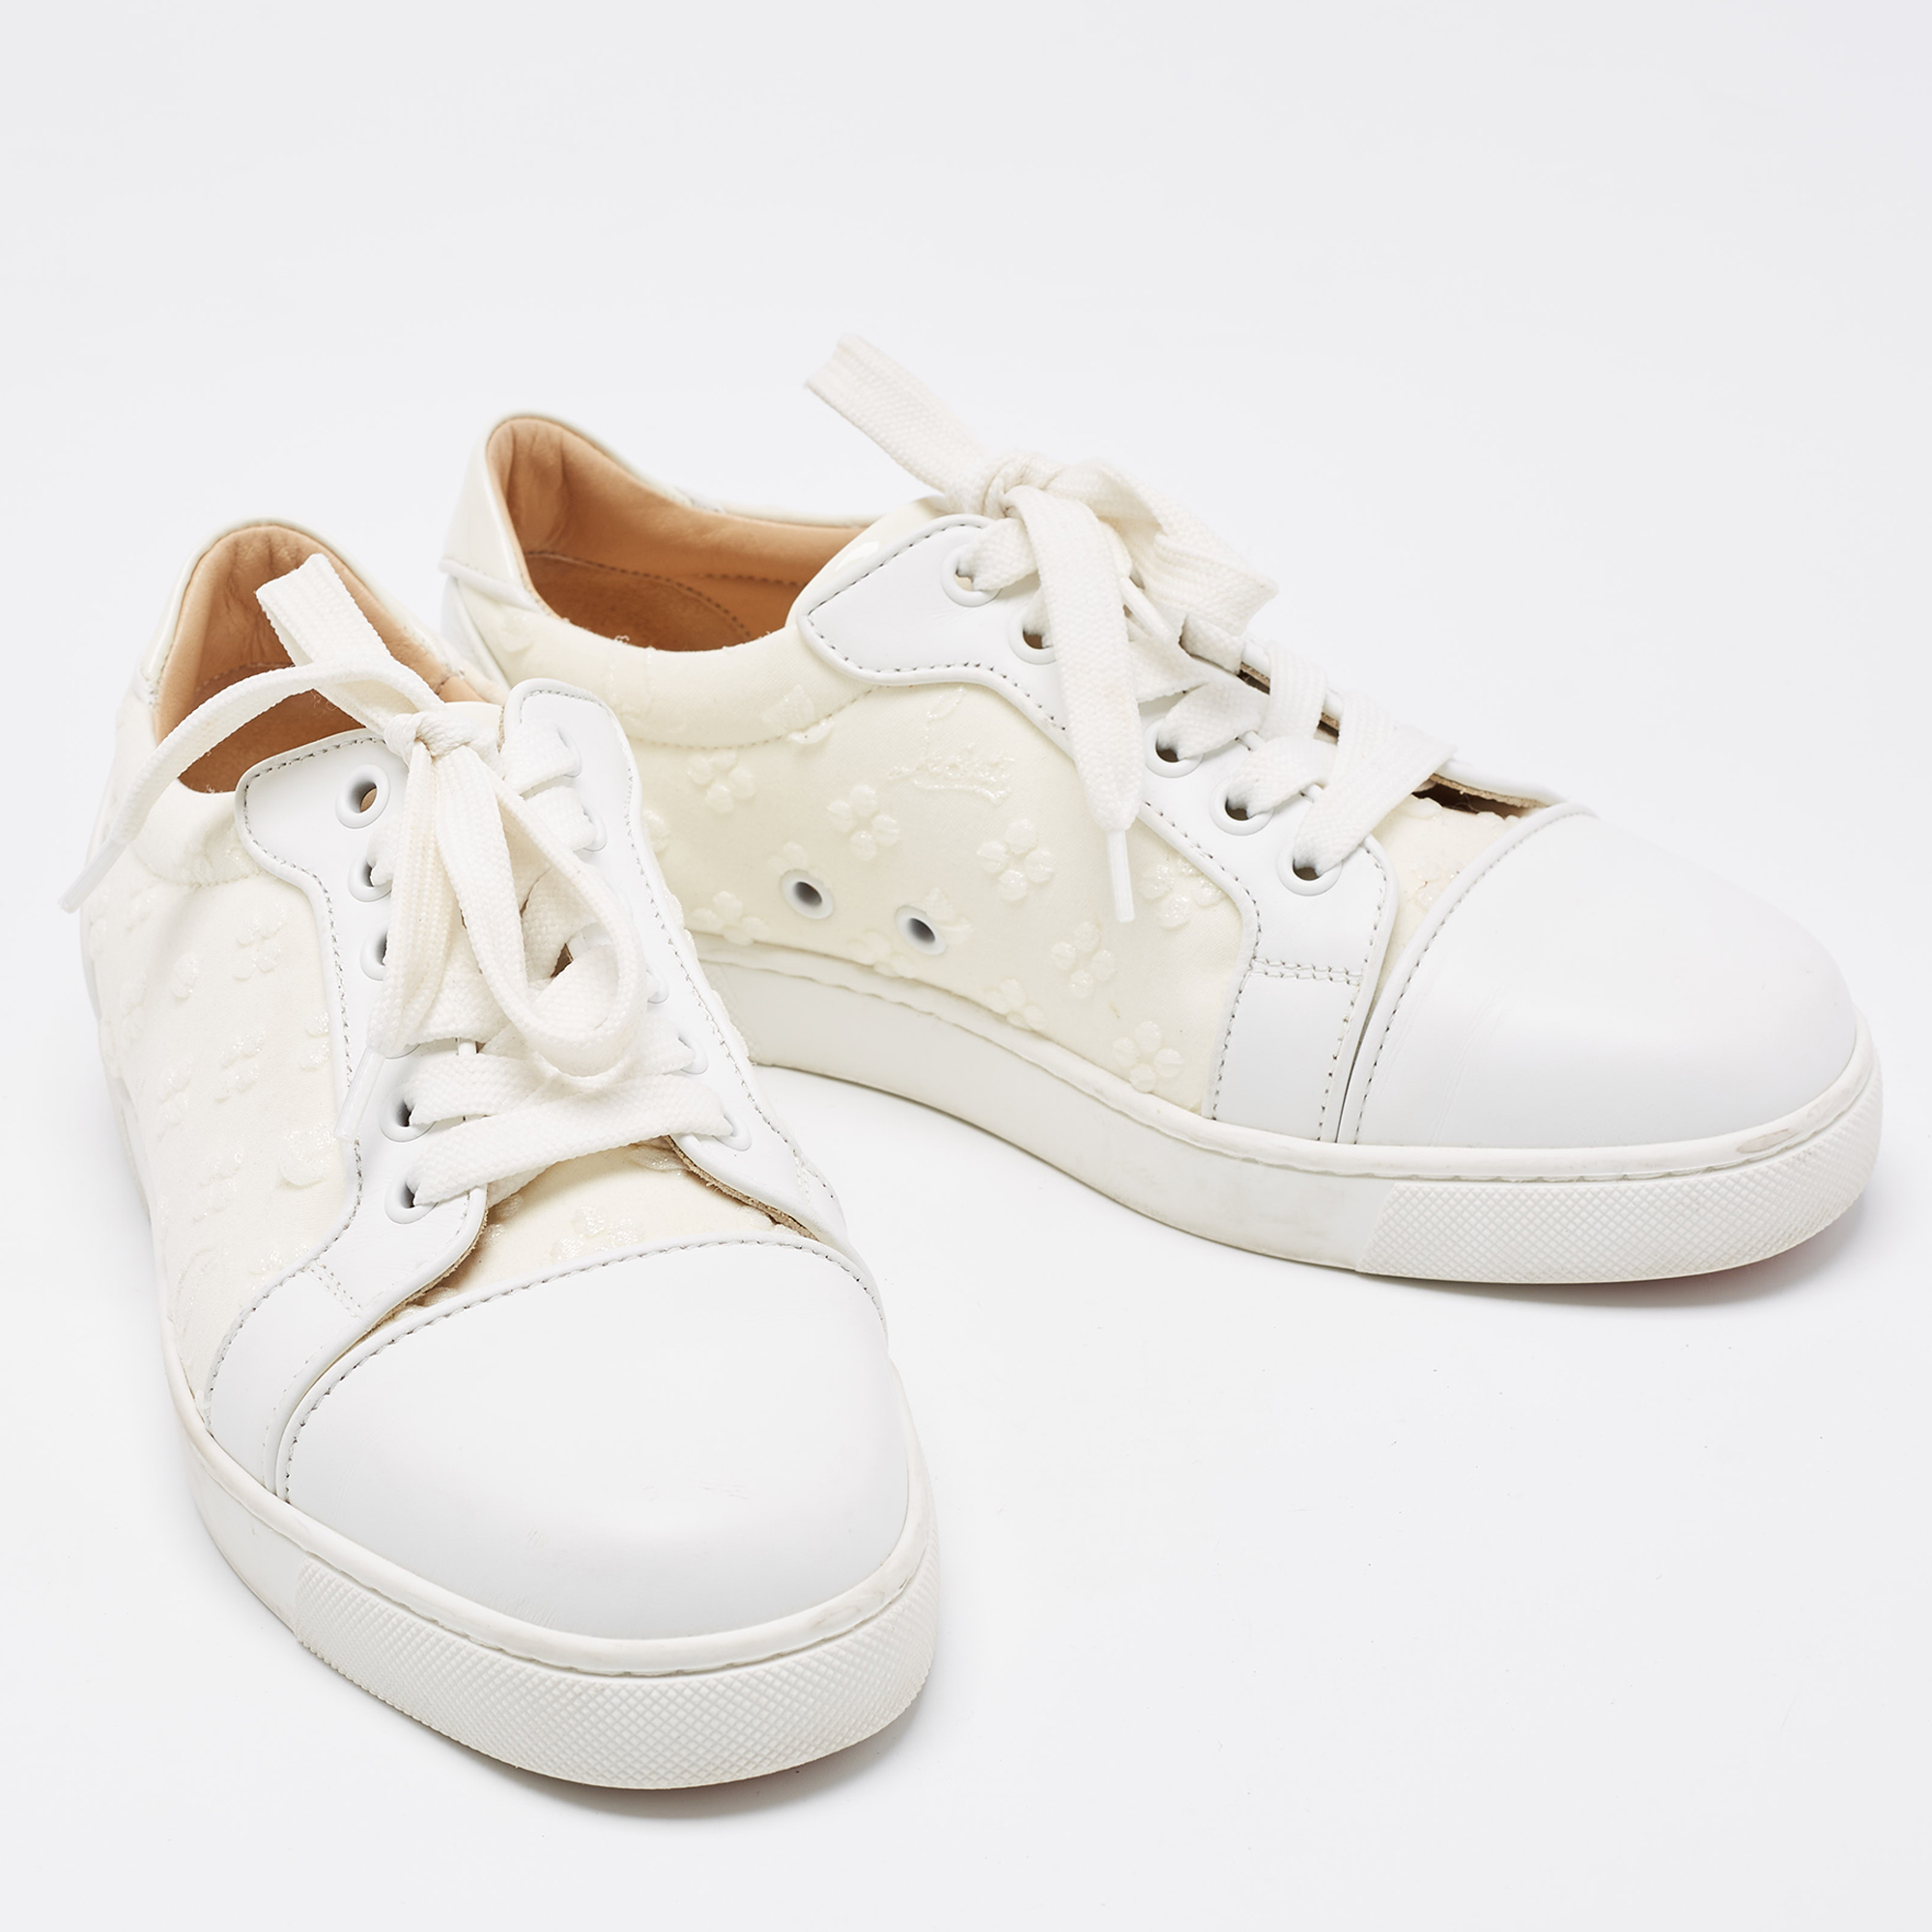 Christian Louboutin White Fabric And Leather Vieira Orlato Trainers Sneakers Size 36.5